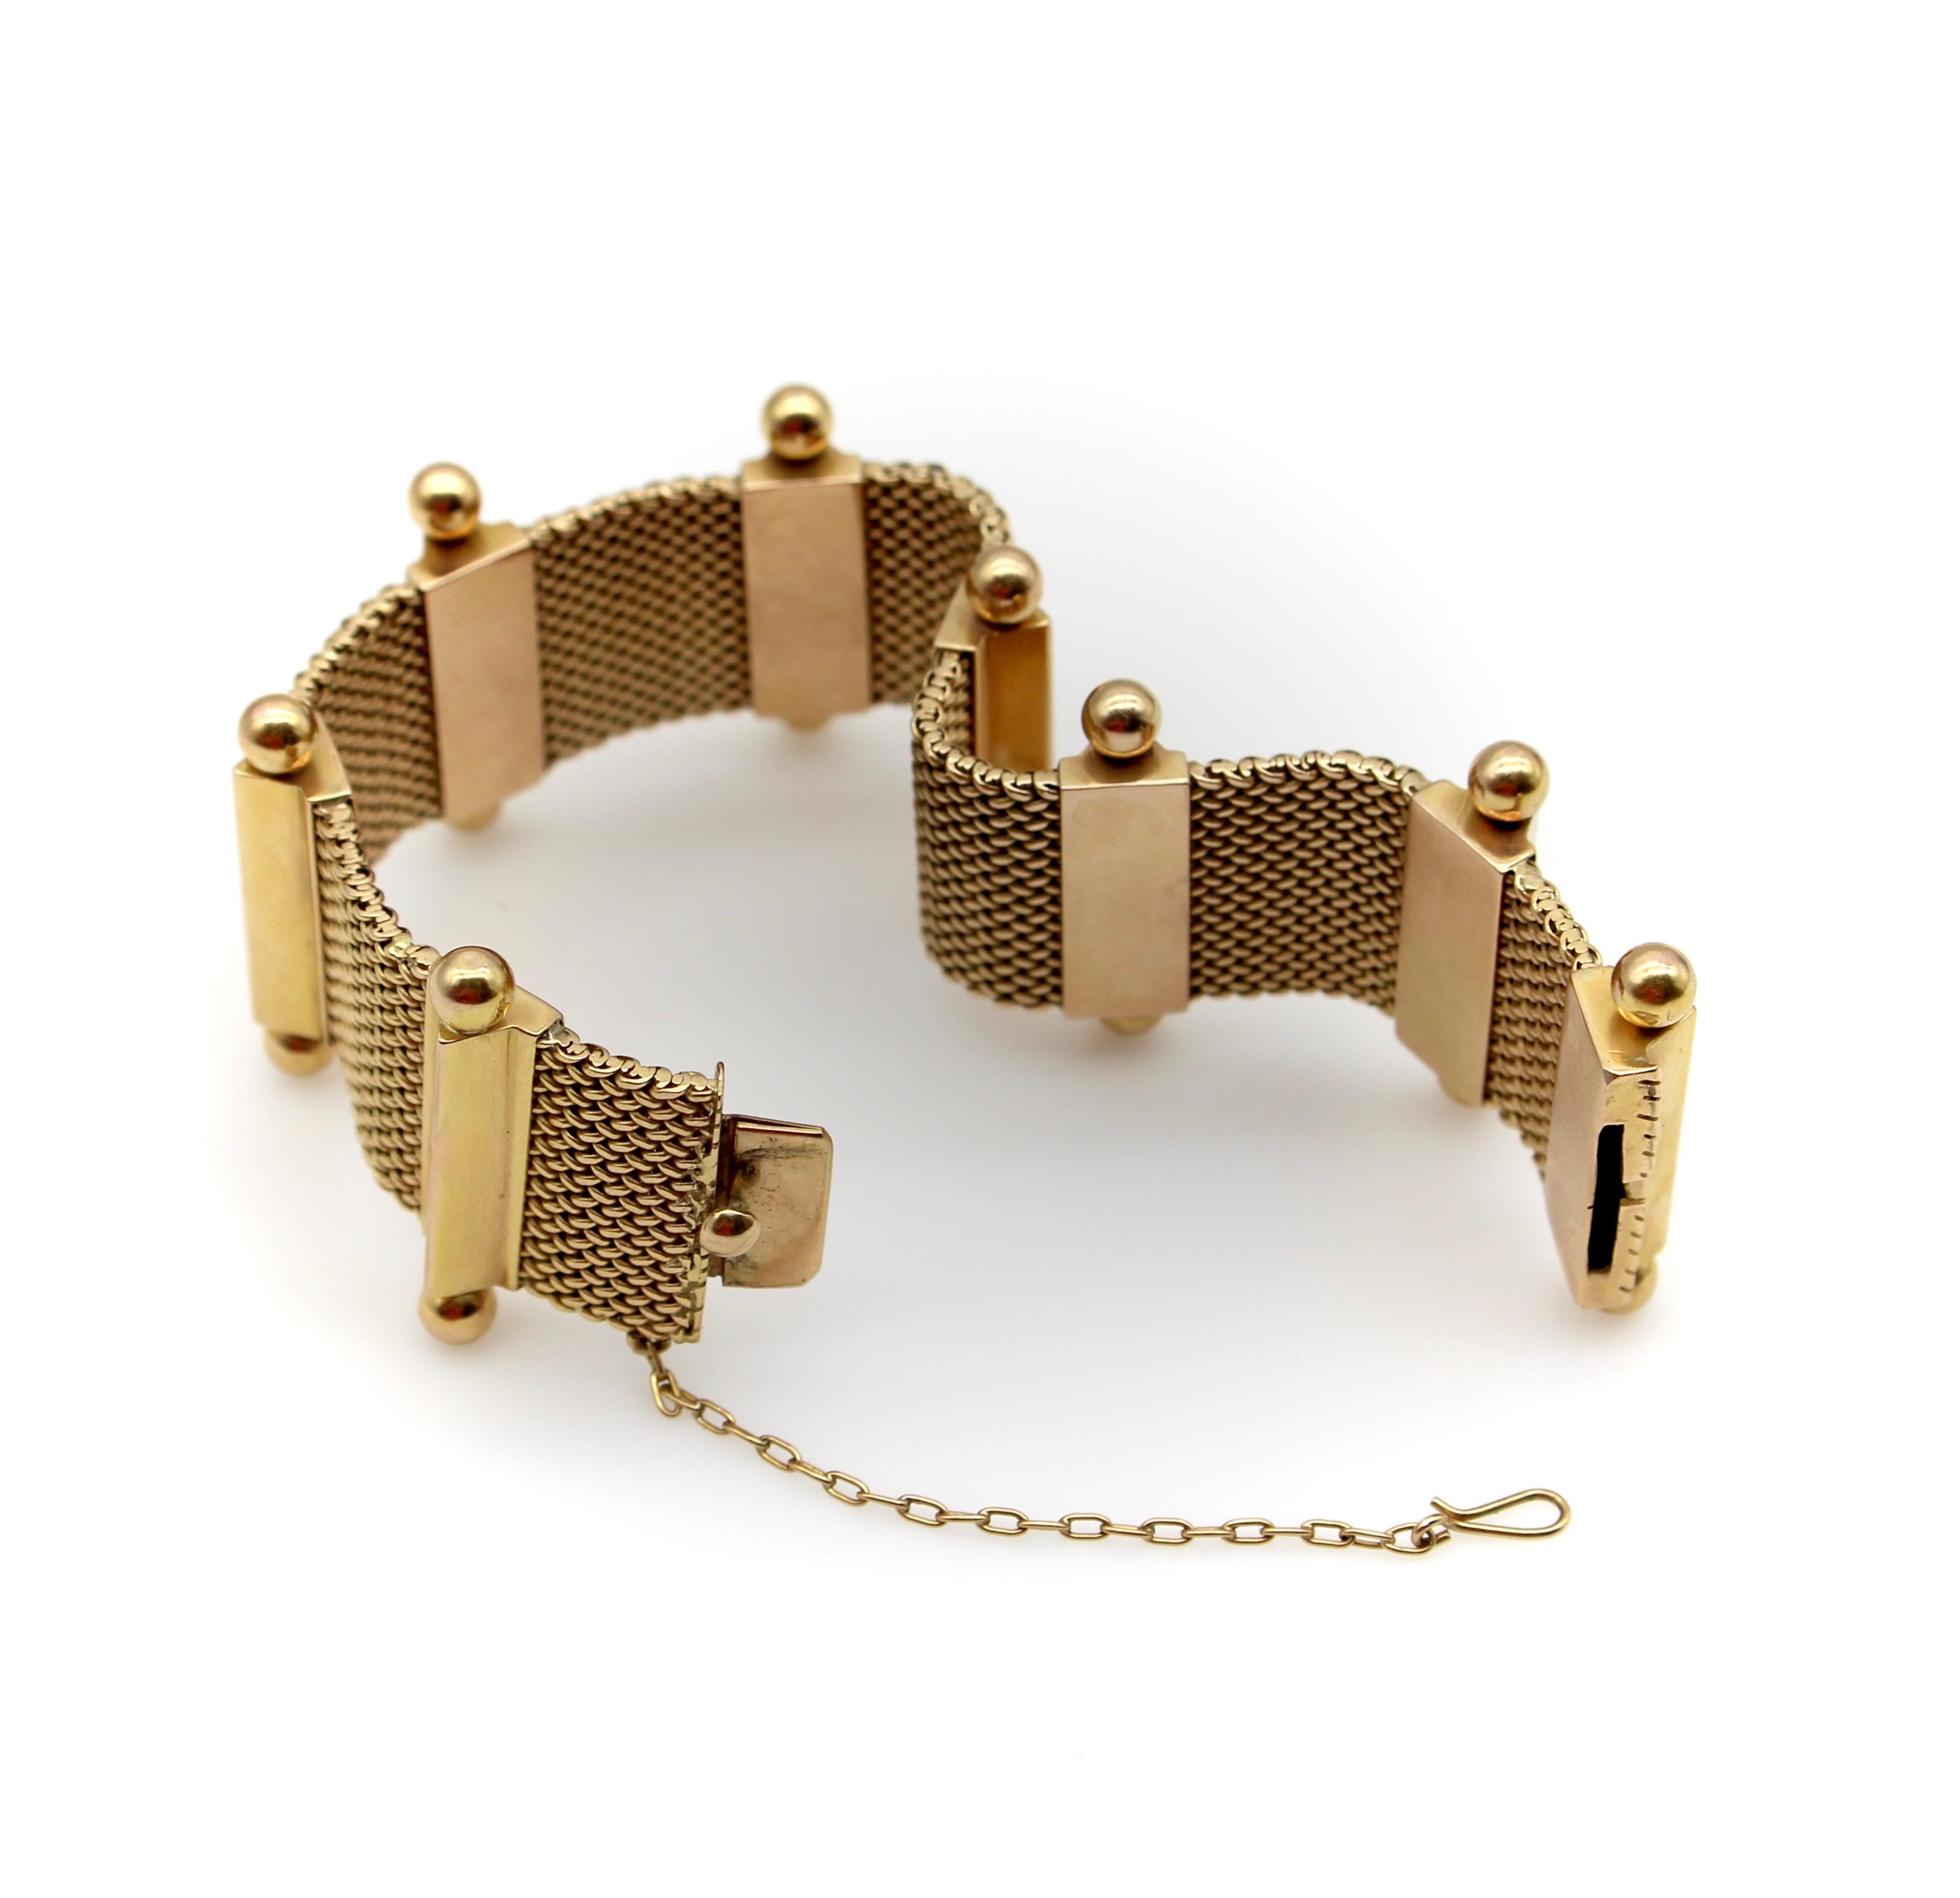 This 18k gold bracelet is composed of hand-woven gold panels, separated by triangular bars that are accentuated at the top with ball finials. The bracelet incorporates several design features that make it unique—while it’s apparent it is a modern